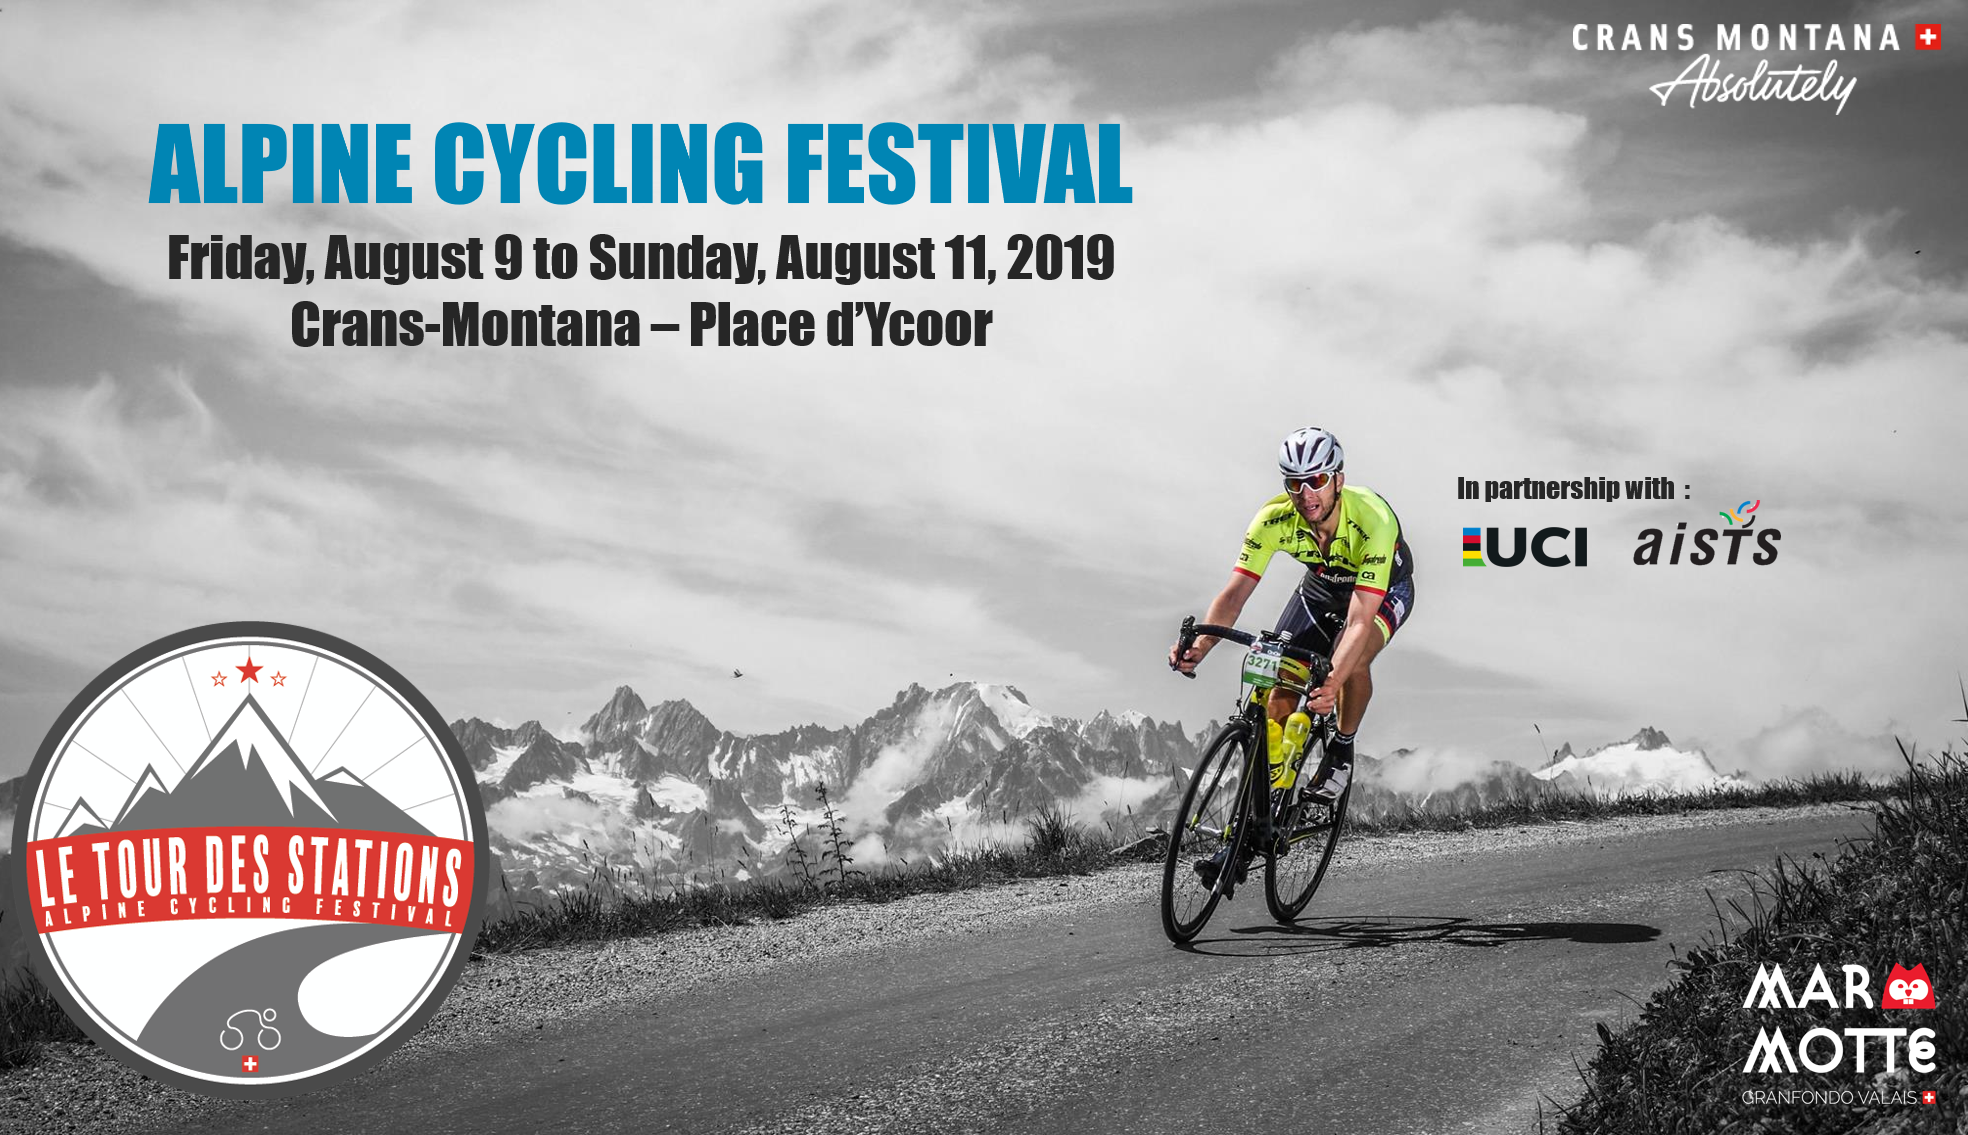 CransMontana launches Alpine Cycling Festival to coincide with